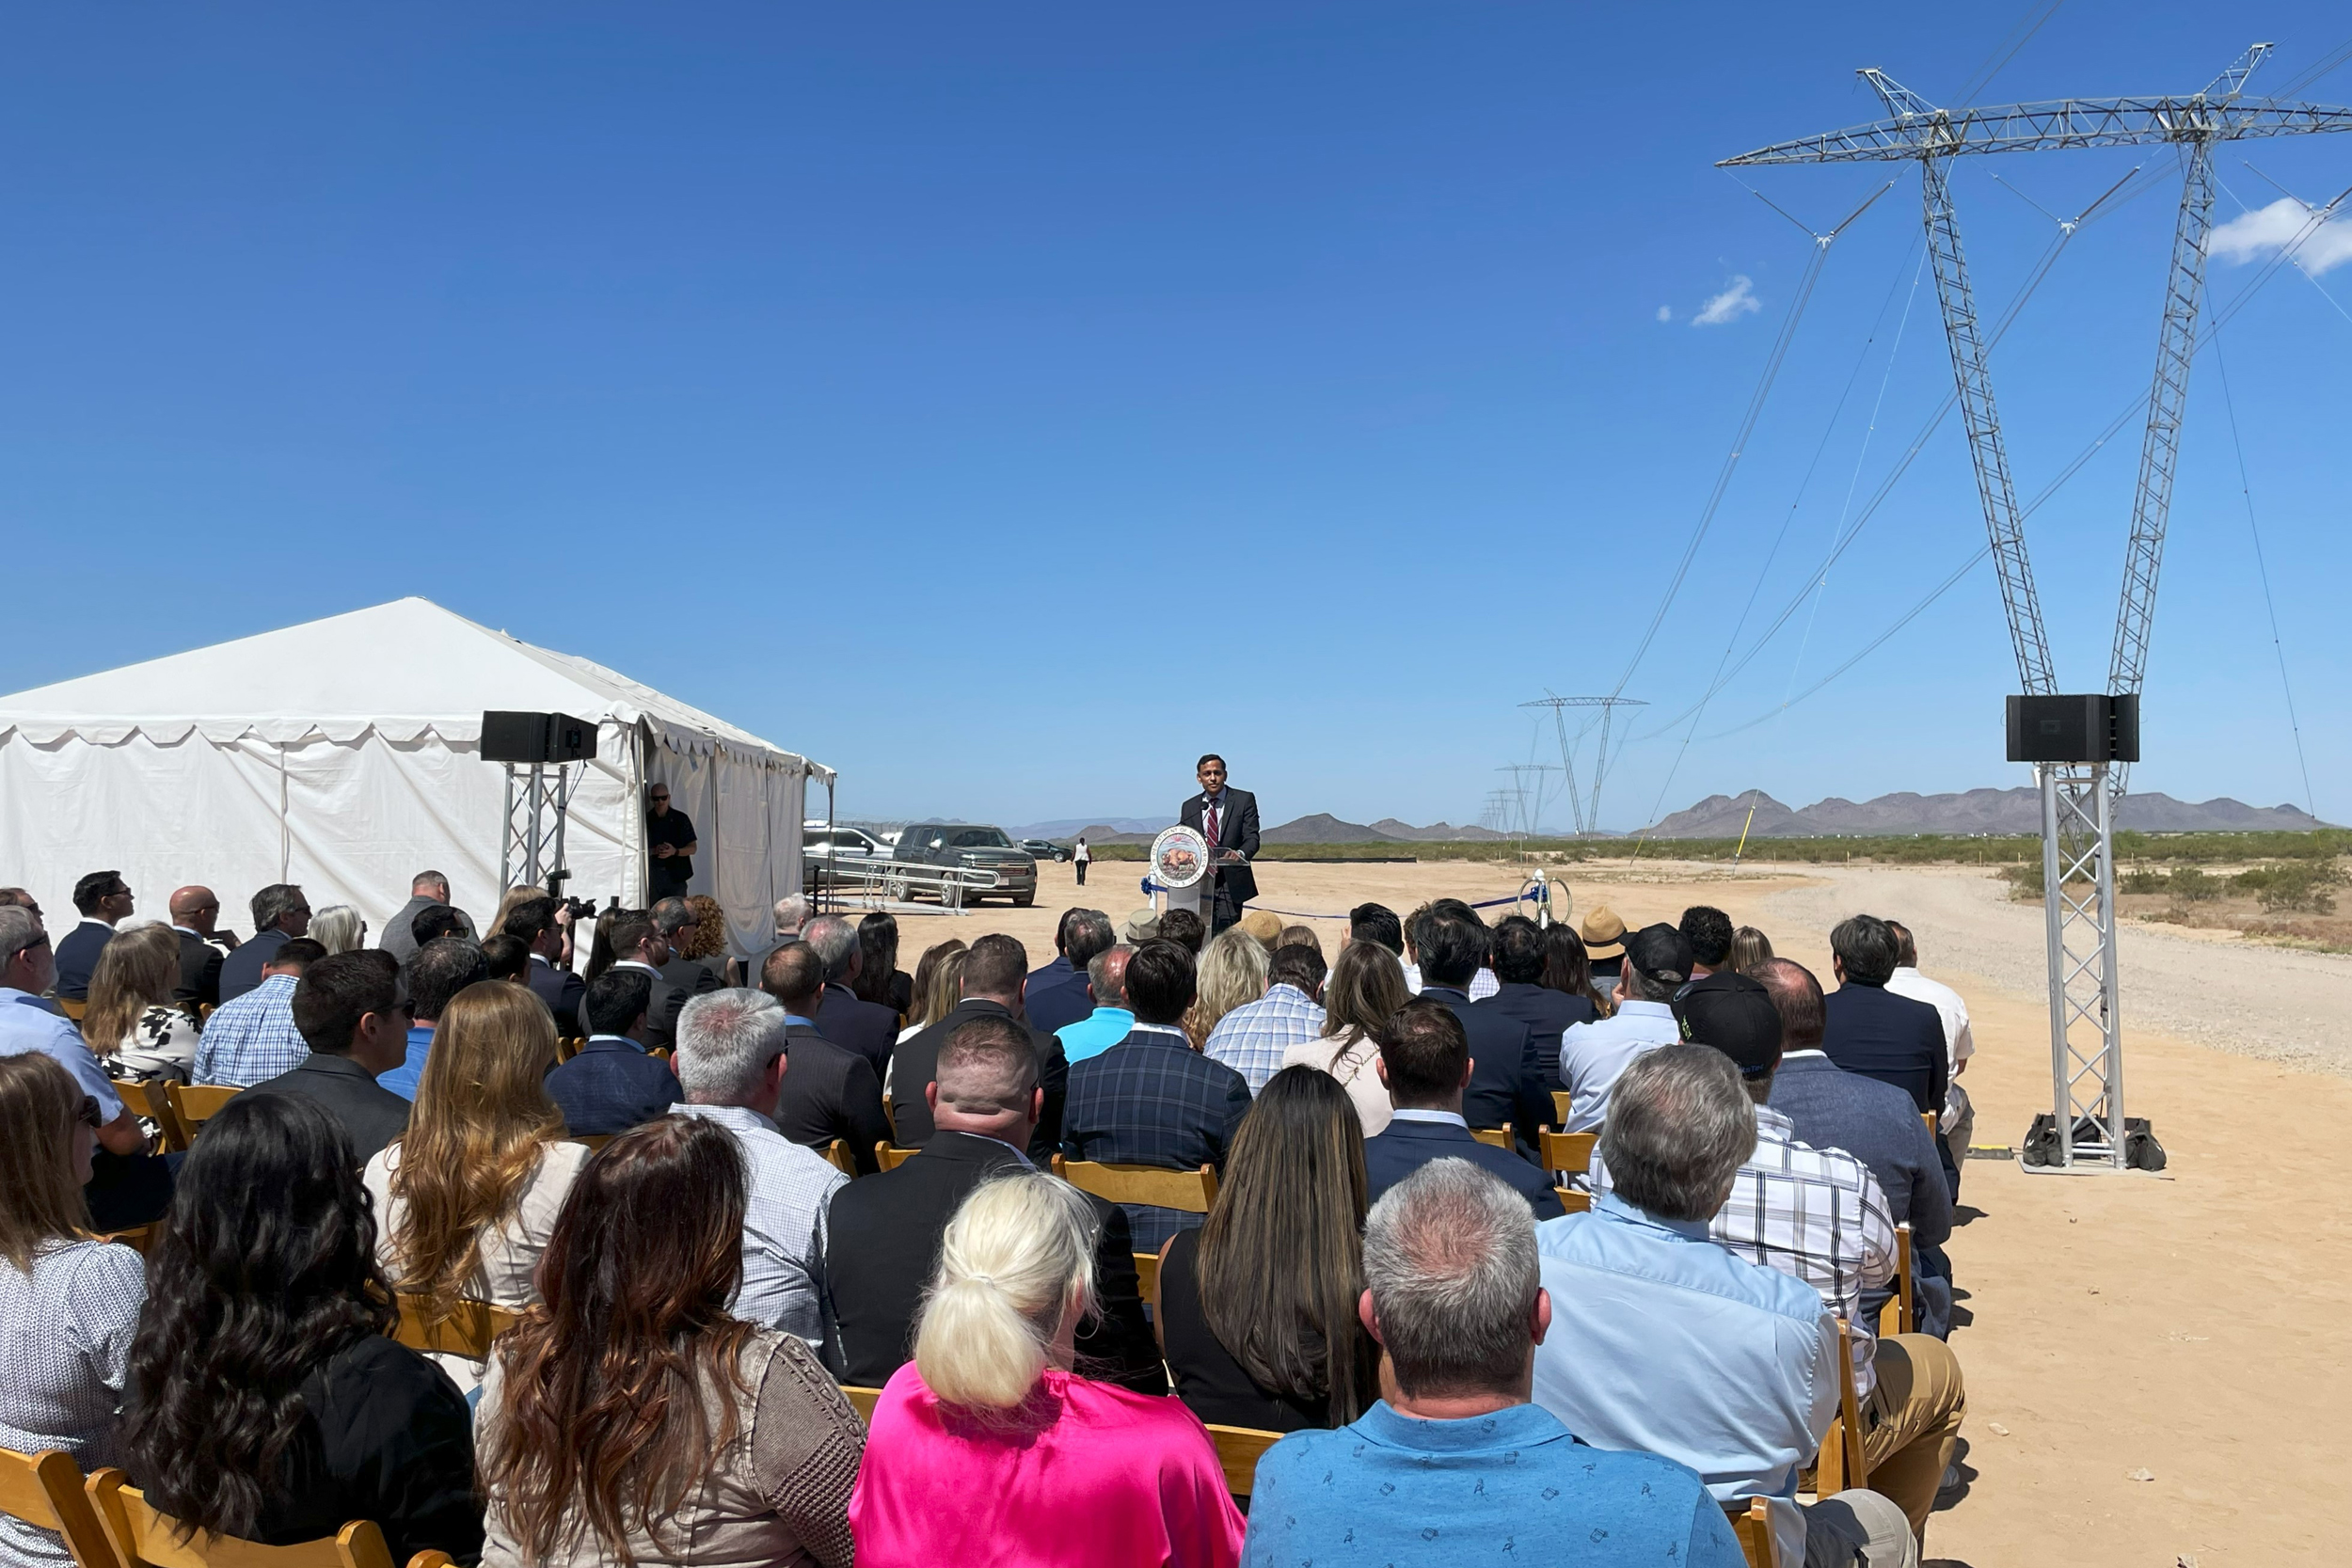 Himanshu Saxena, CEO of Lotus Infrastructure Partners, speaks on April 25 at an event to recognize the completion of the Ten West Link, a transmission line that spans between Arizona and California. Credit: Noel Lyn Smith/Inside Climate News